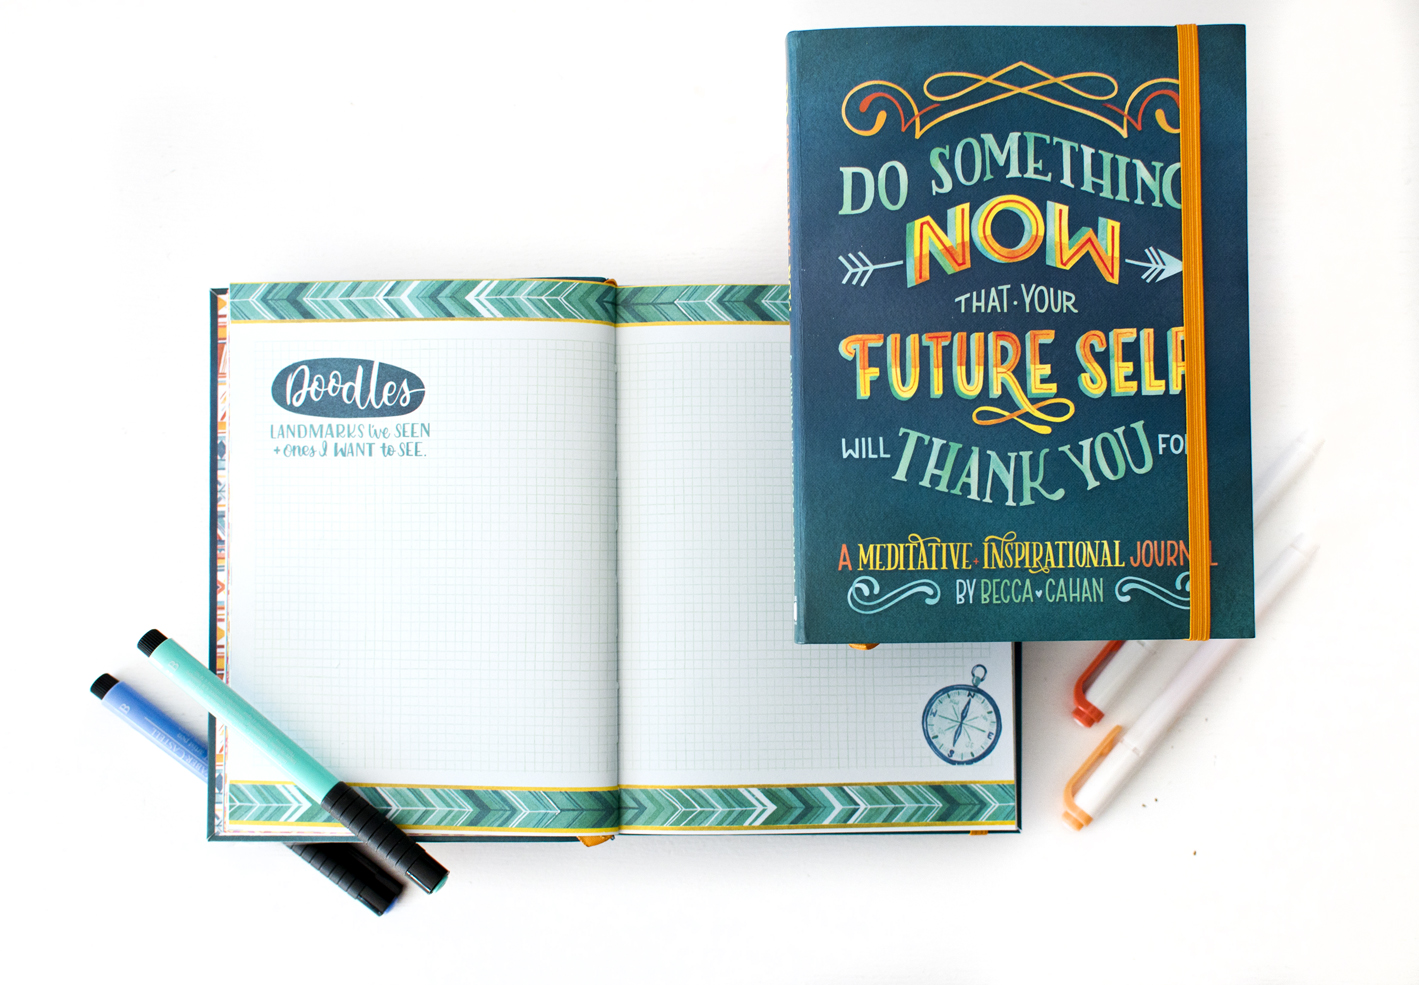 "Do Something Now" Sellers Publishing Journal Illustrated by Becca Cahan as seen on Beccacahan.com